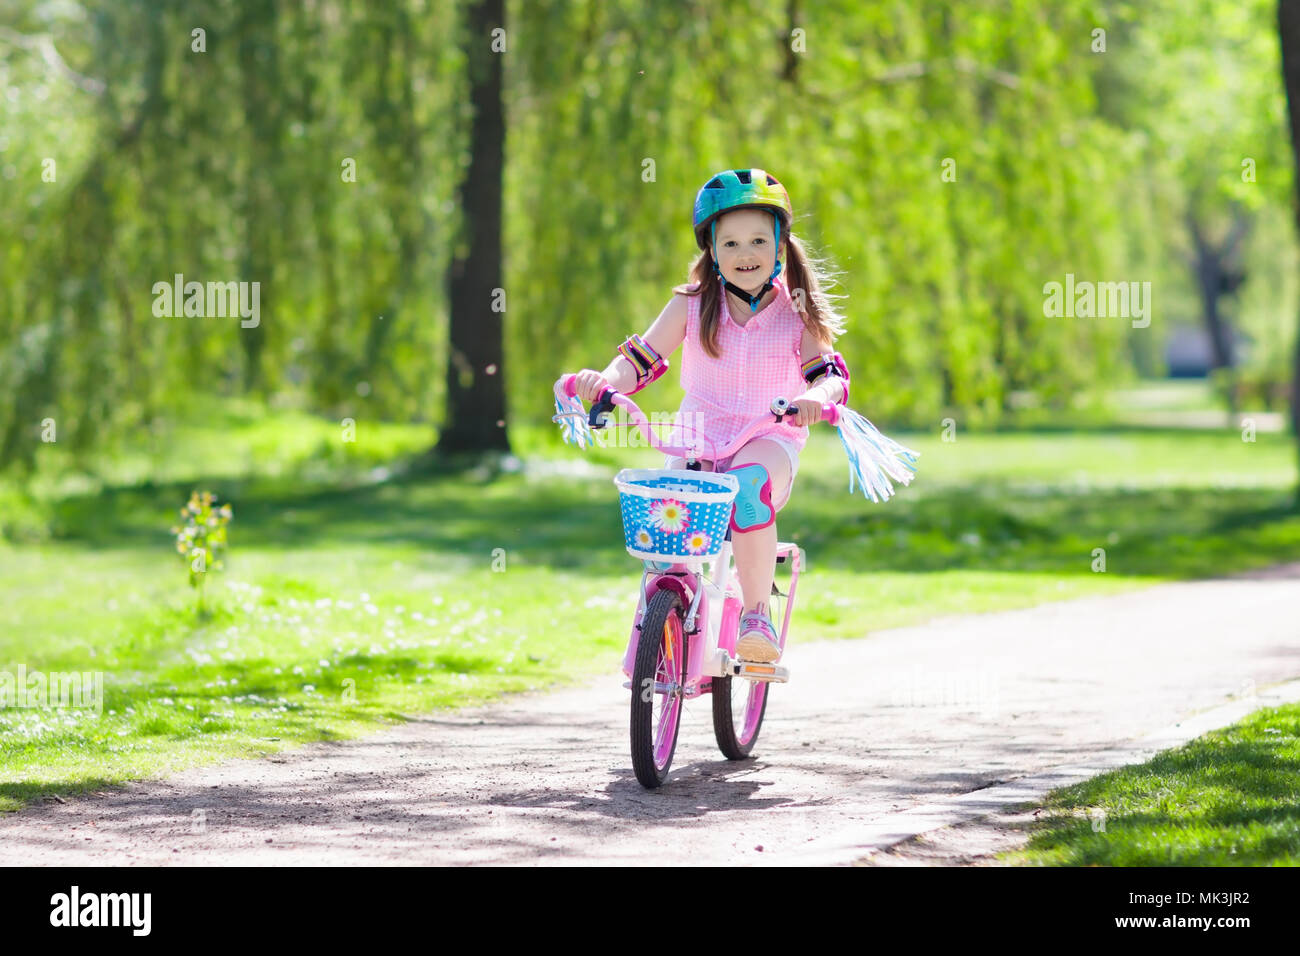 how to ride a bicycle without training wheels